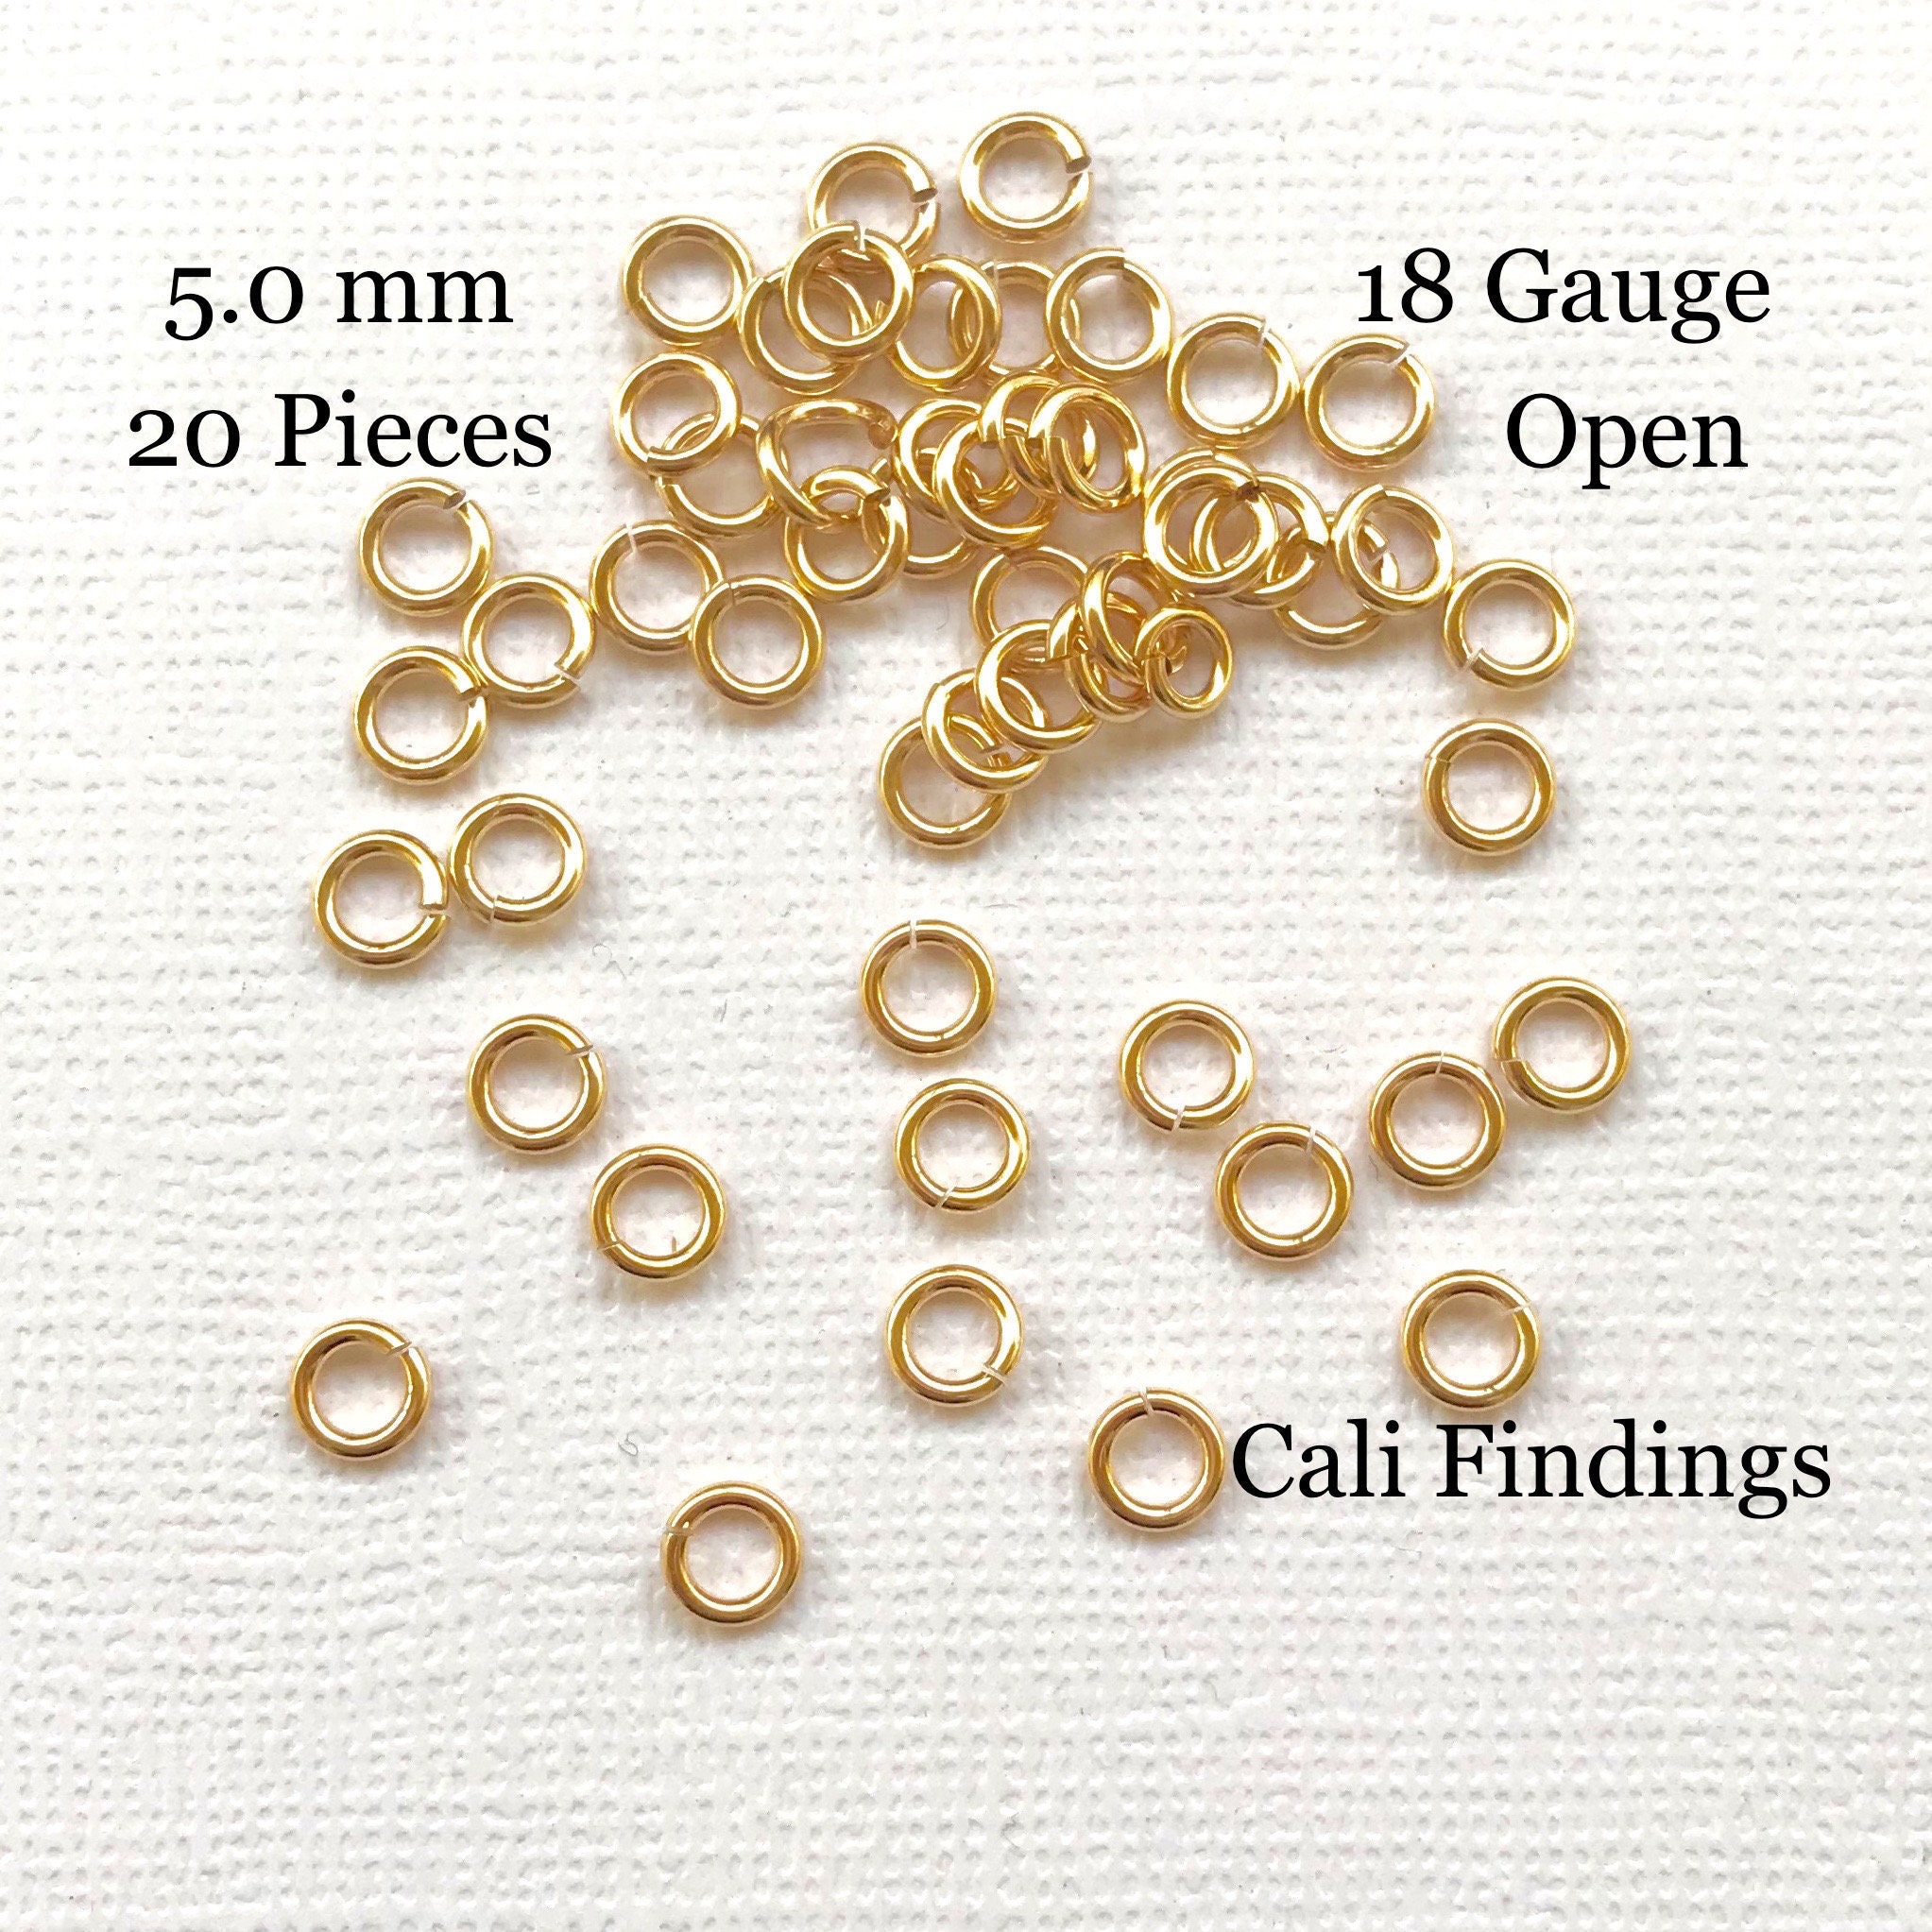 Open Split Jumpring Jewelry Supplies & DIY Findings 2204 20 Pieces 14K Filled Jump Ring Gold Fill Jump Rings Size 3 mm 22 Gauge